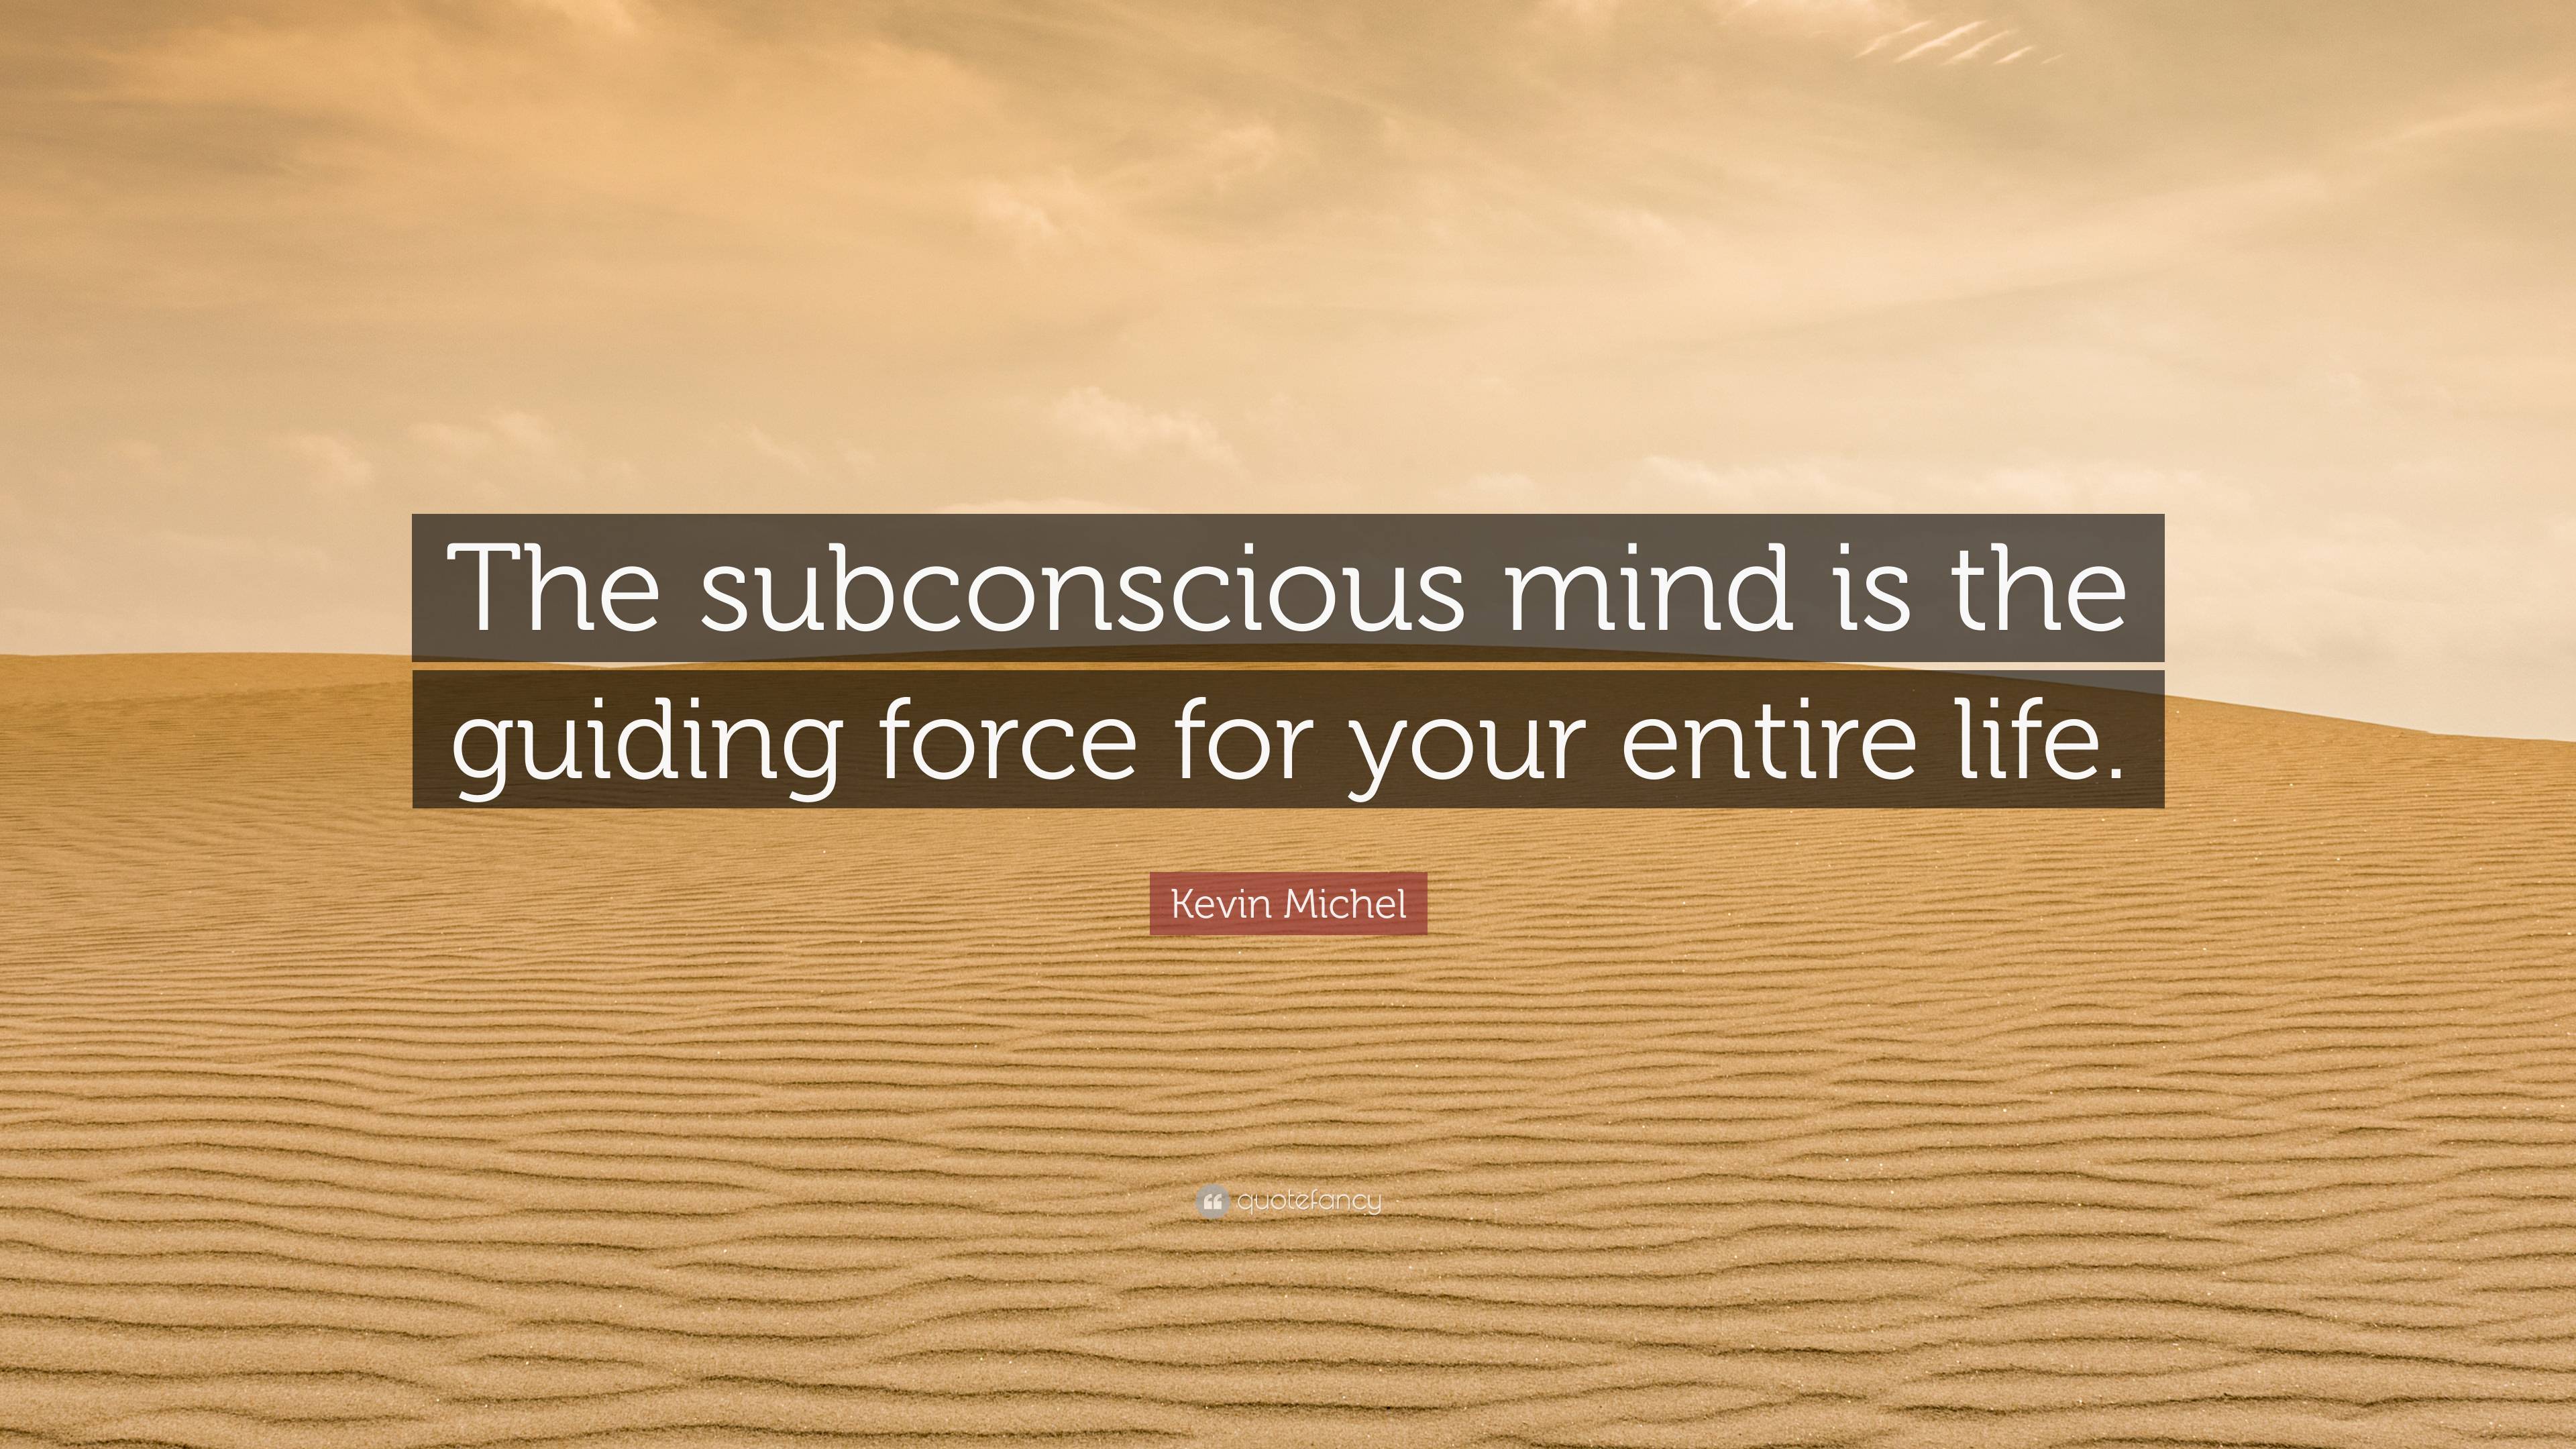 Kevin Michel Quote: “The subconscious mind is the guiding force for ...